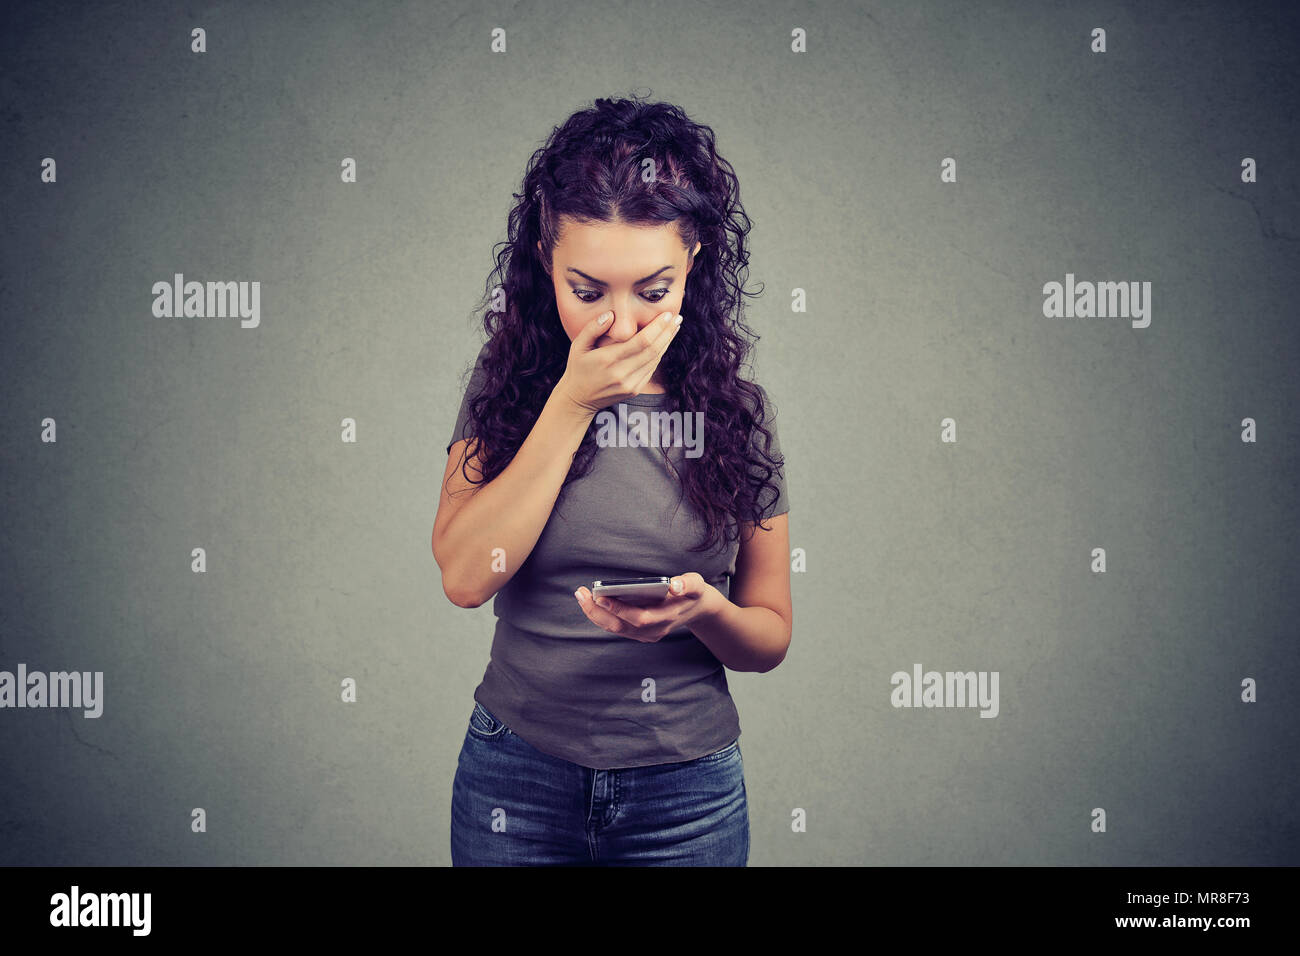 Young amazed girl covering mouth and reading news on smartphone having strong reaction on gray background. Stock Photo